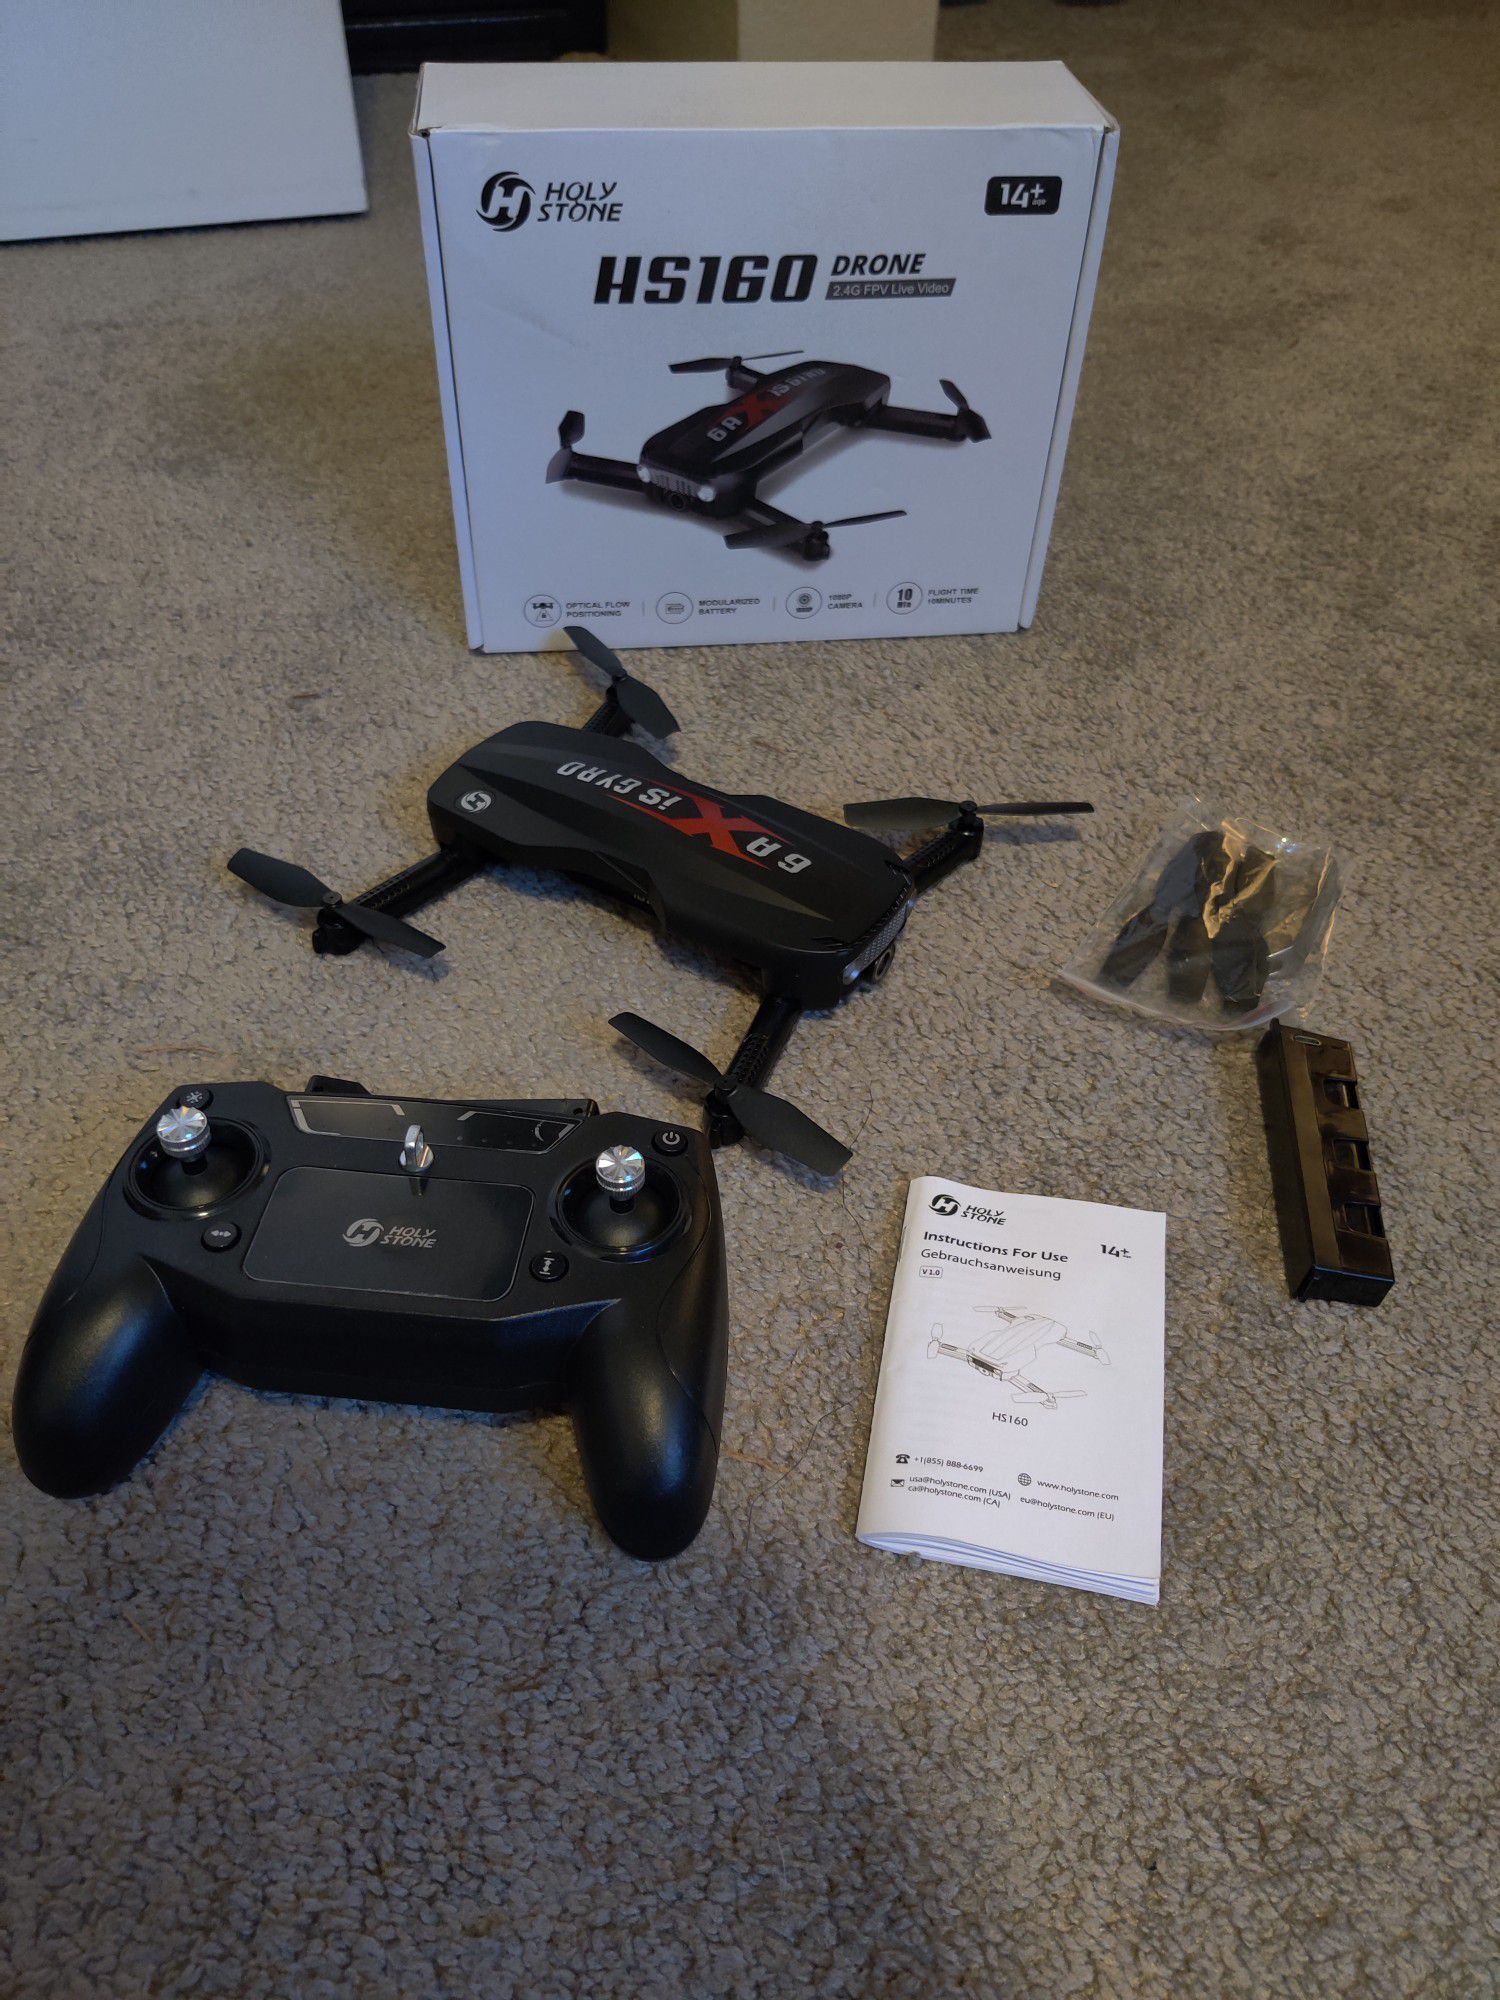 Holy Stone HS160 Drone